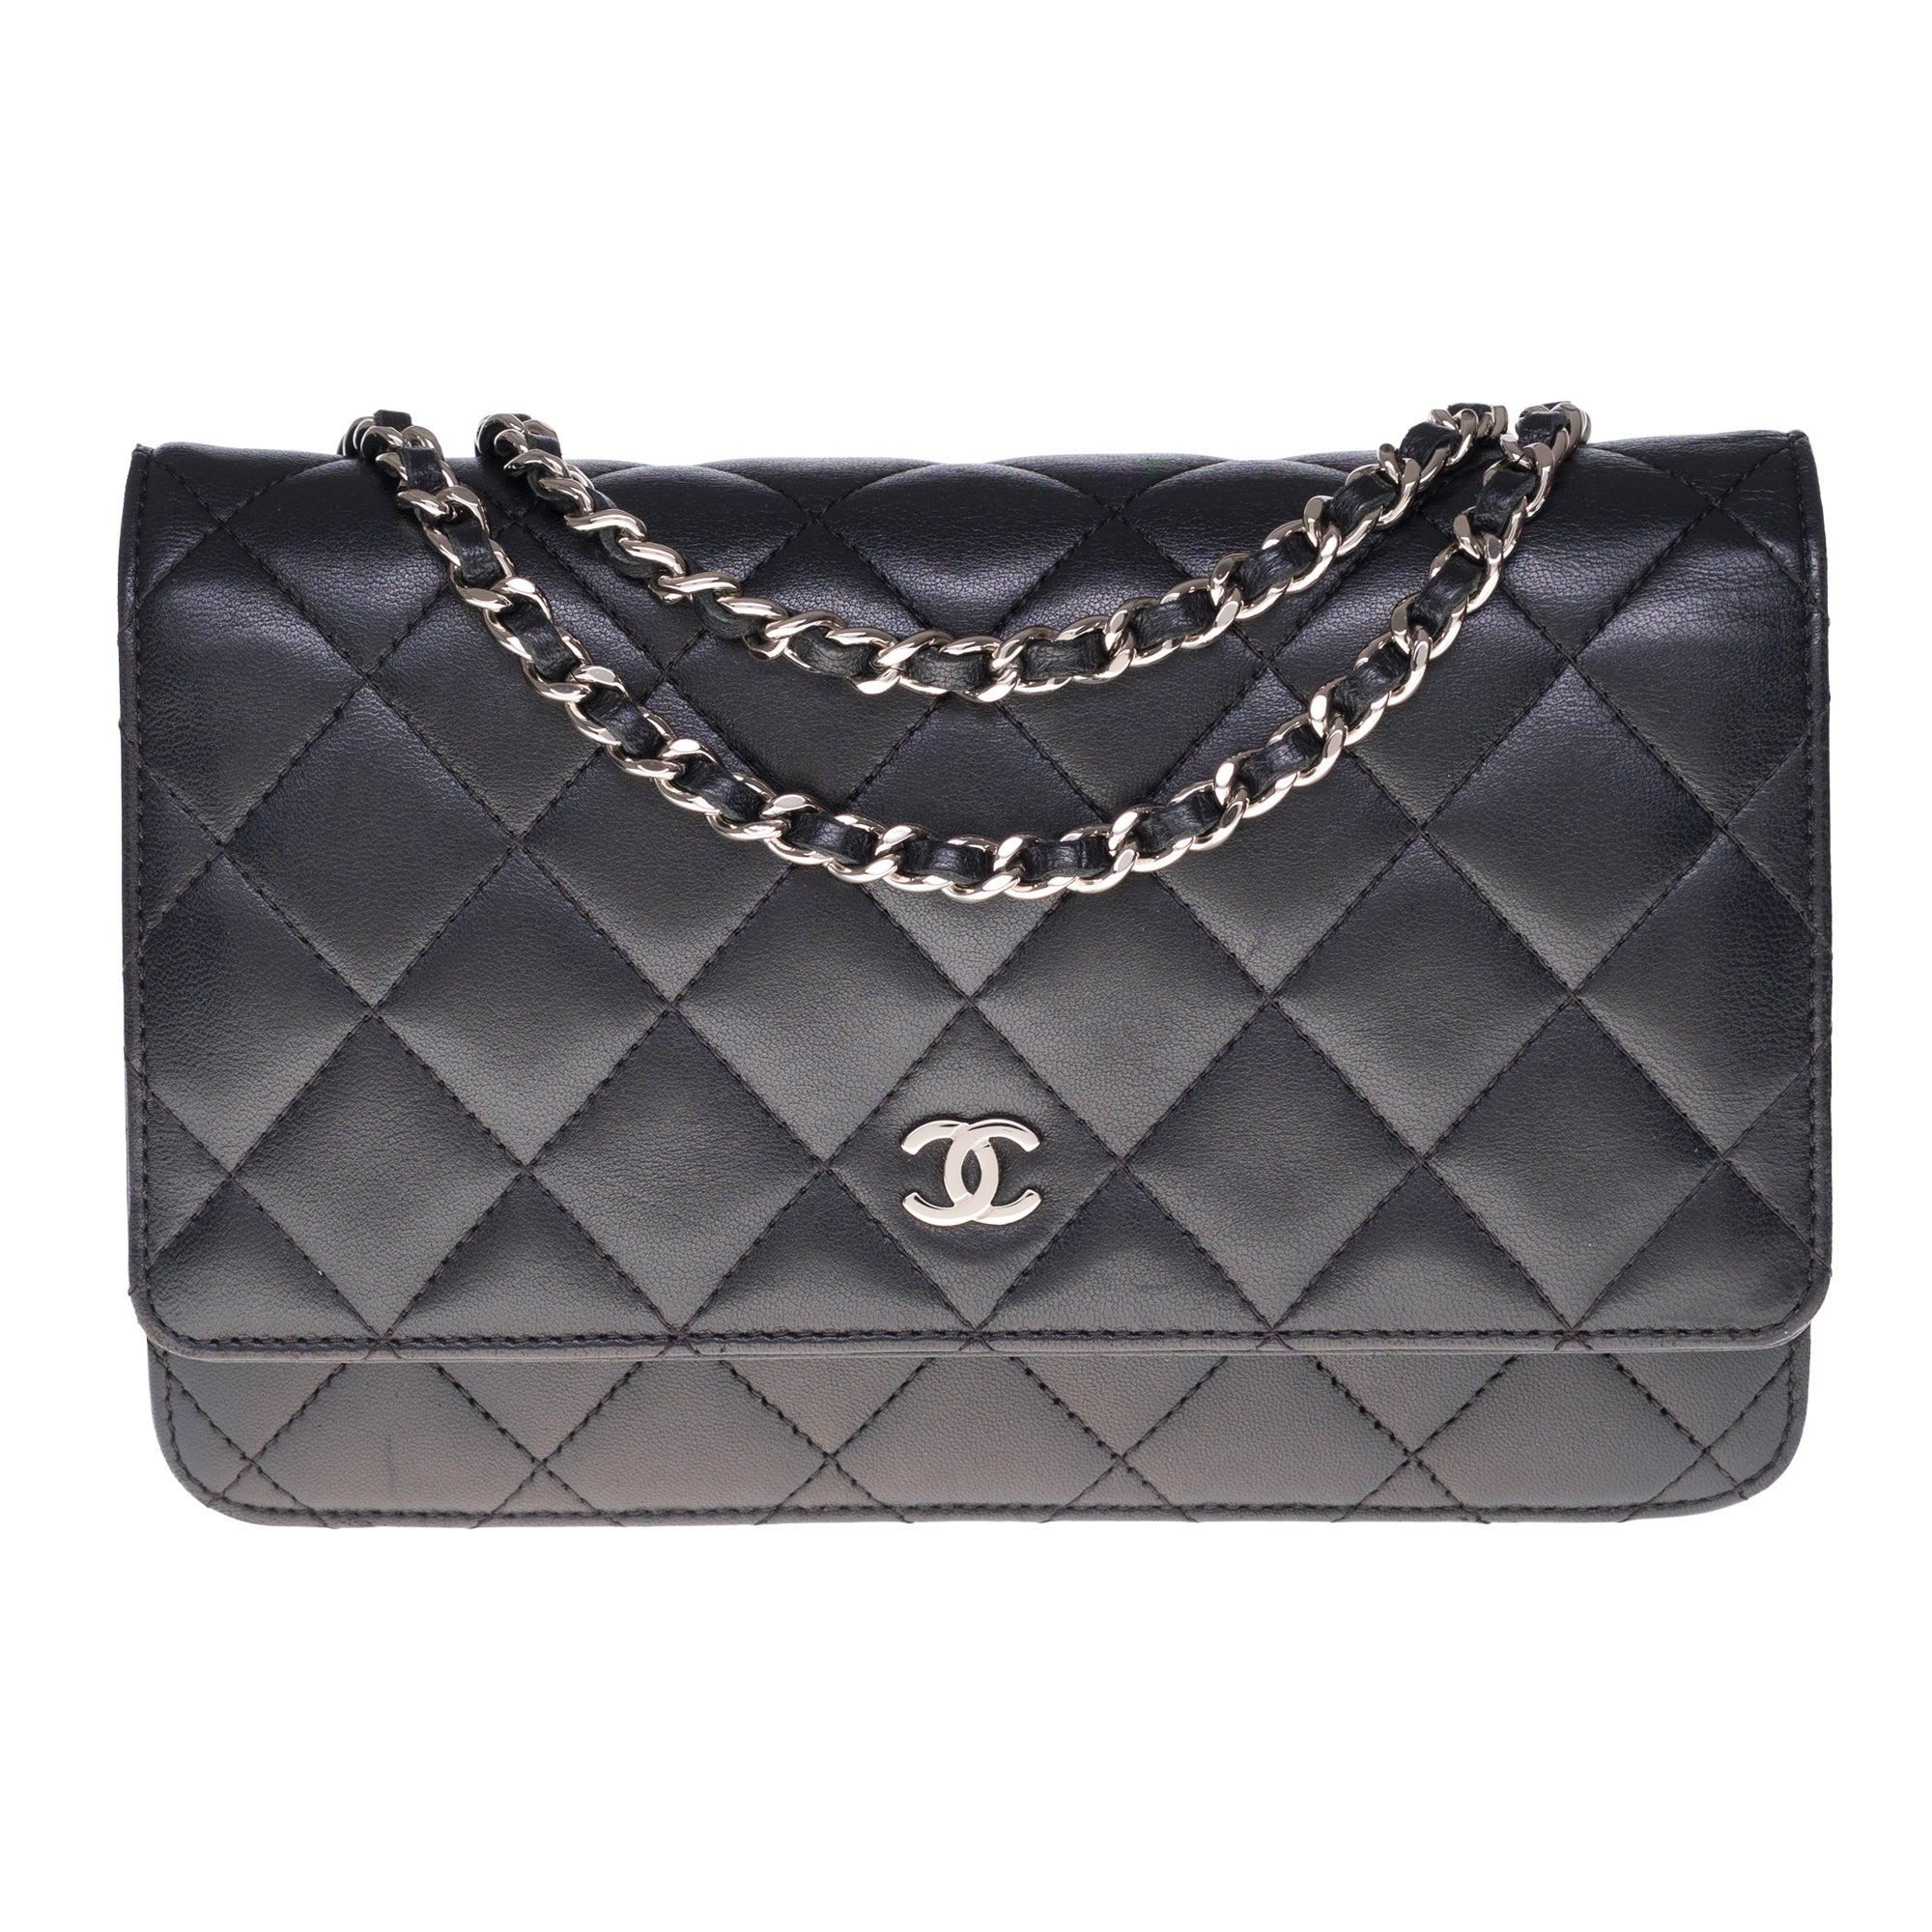 Amazing Chanel Wallet on Chain (WOC) shoulder bag in black quilted leather, SHW